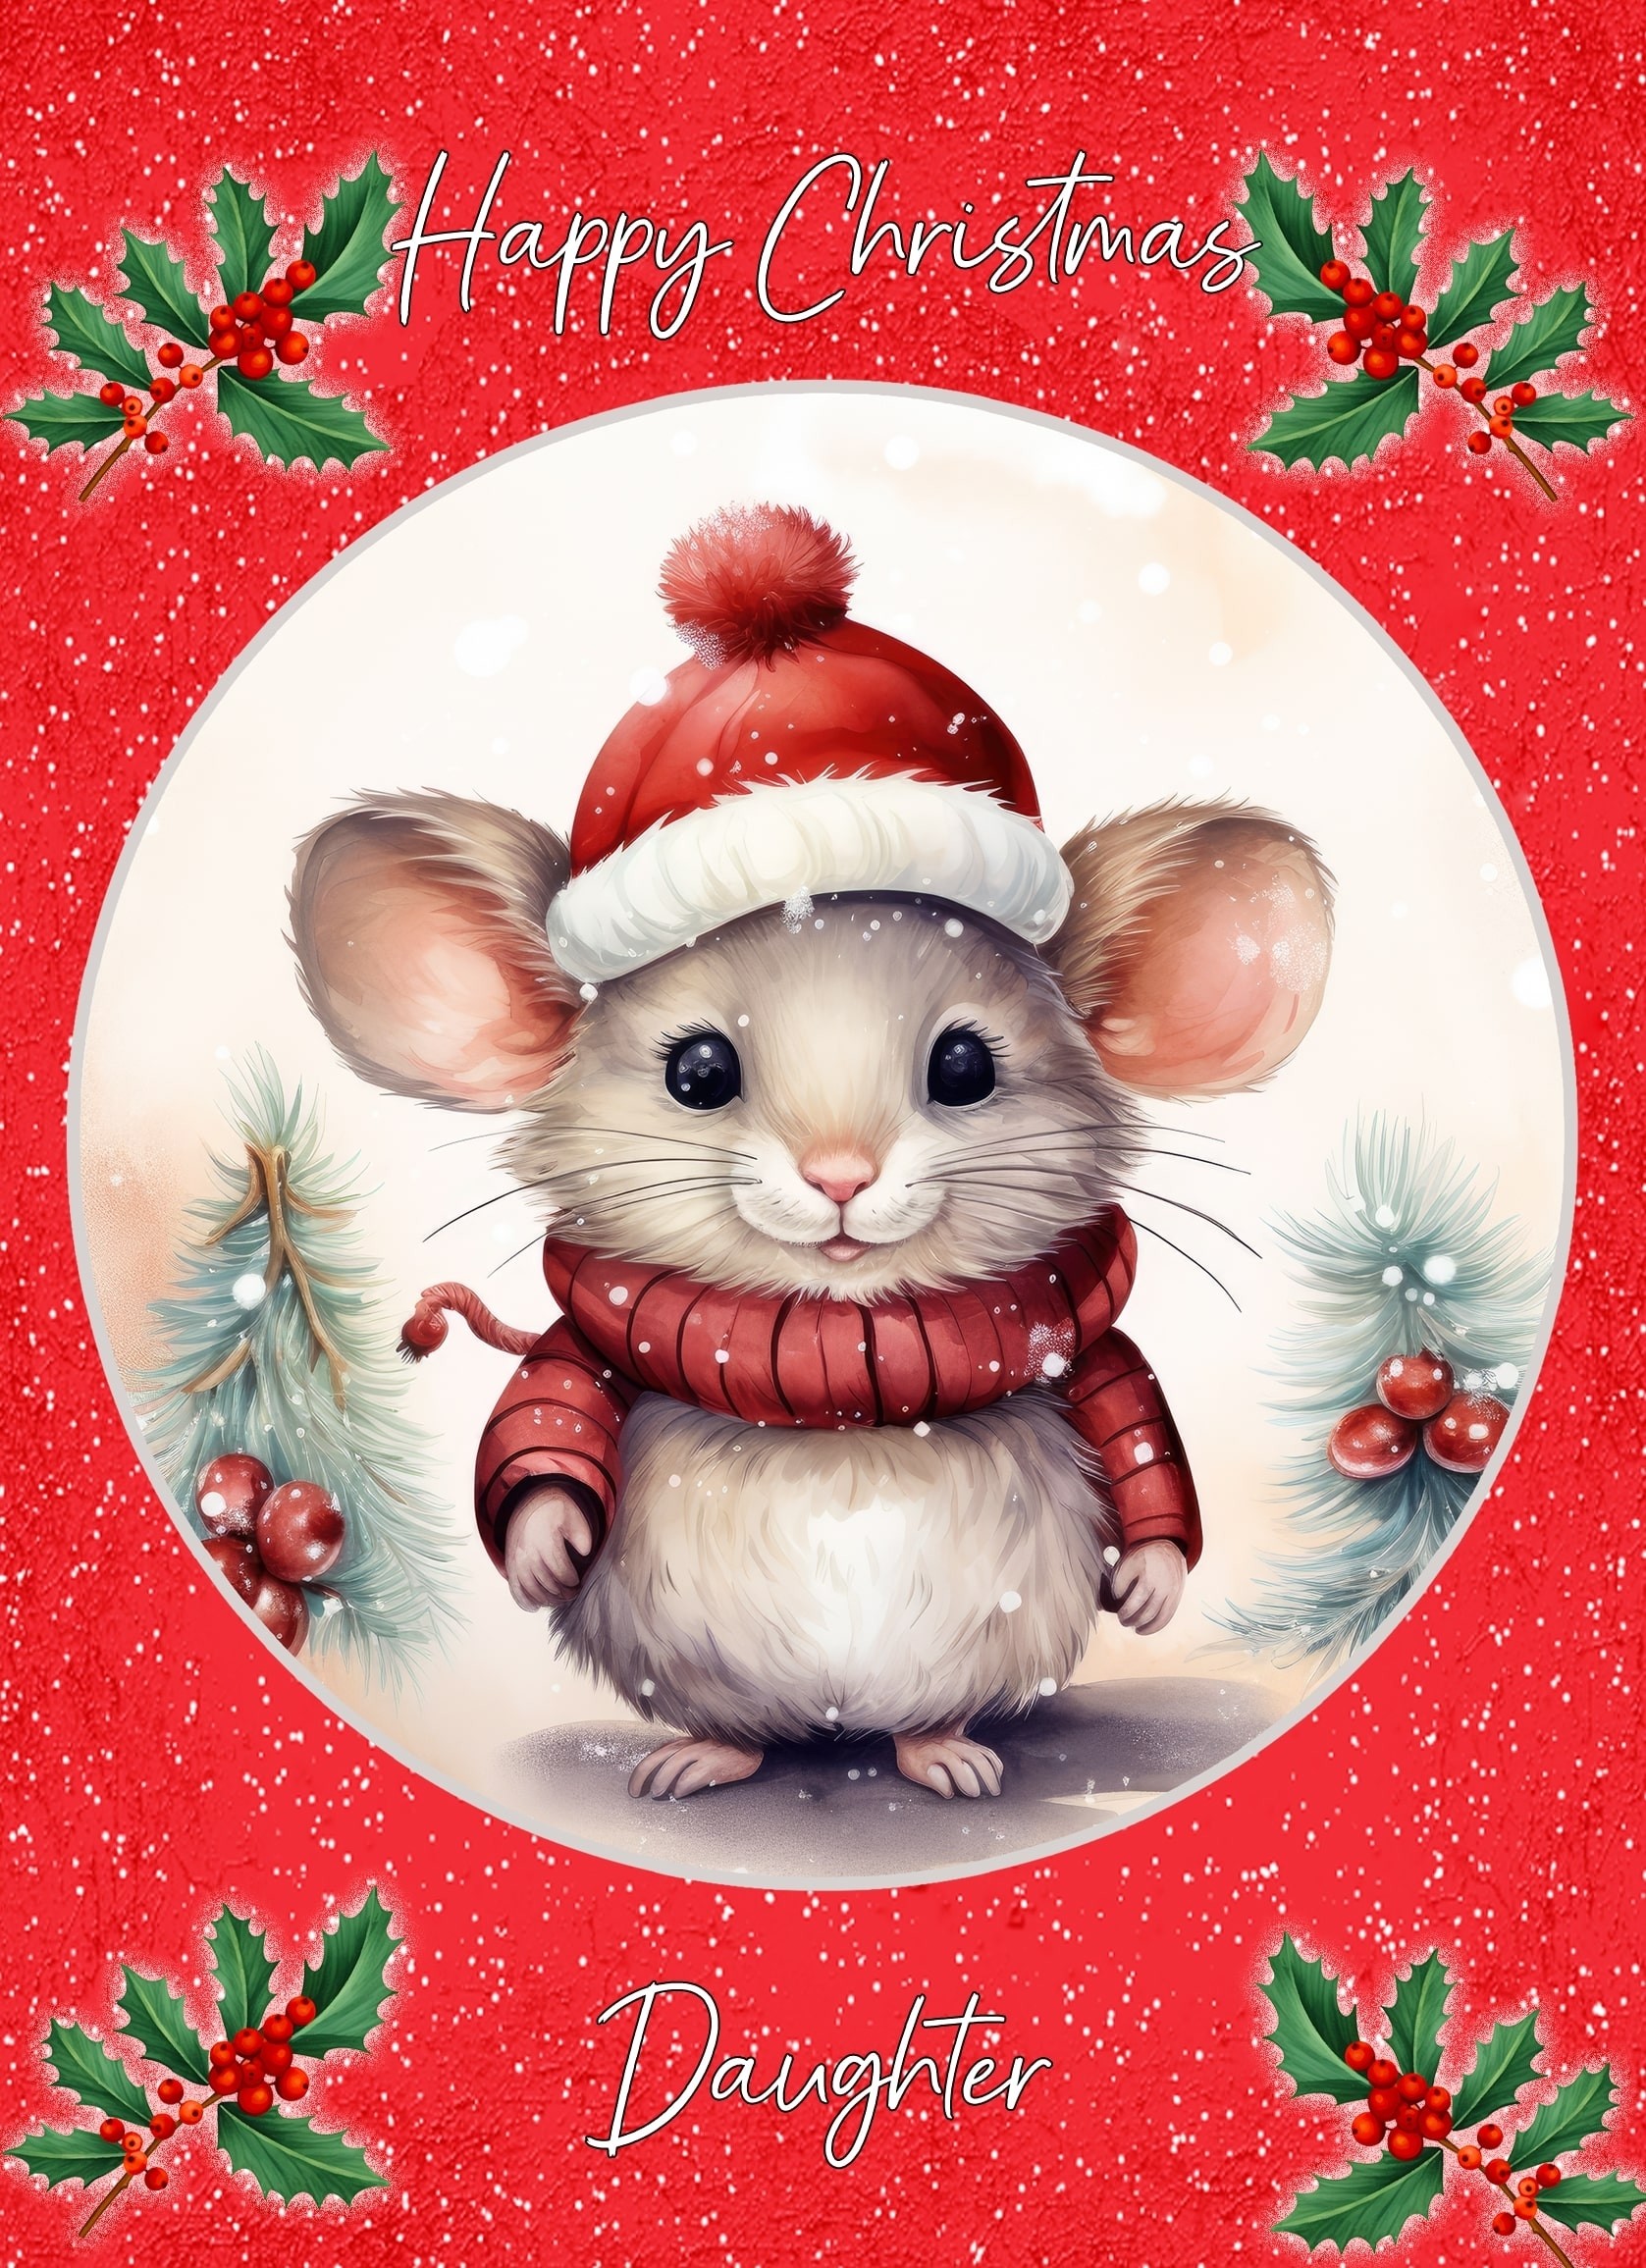 Christmas Card For Daughter (Globe, Mouse)